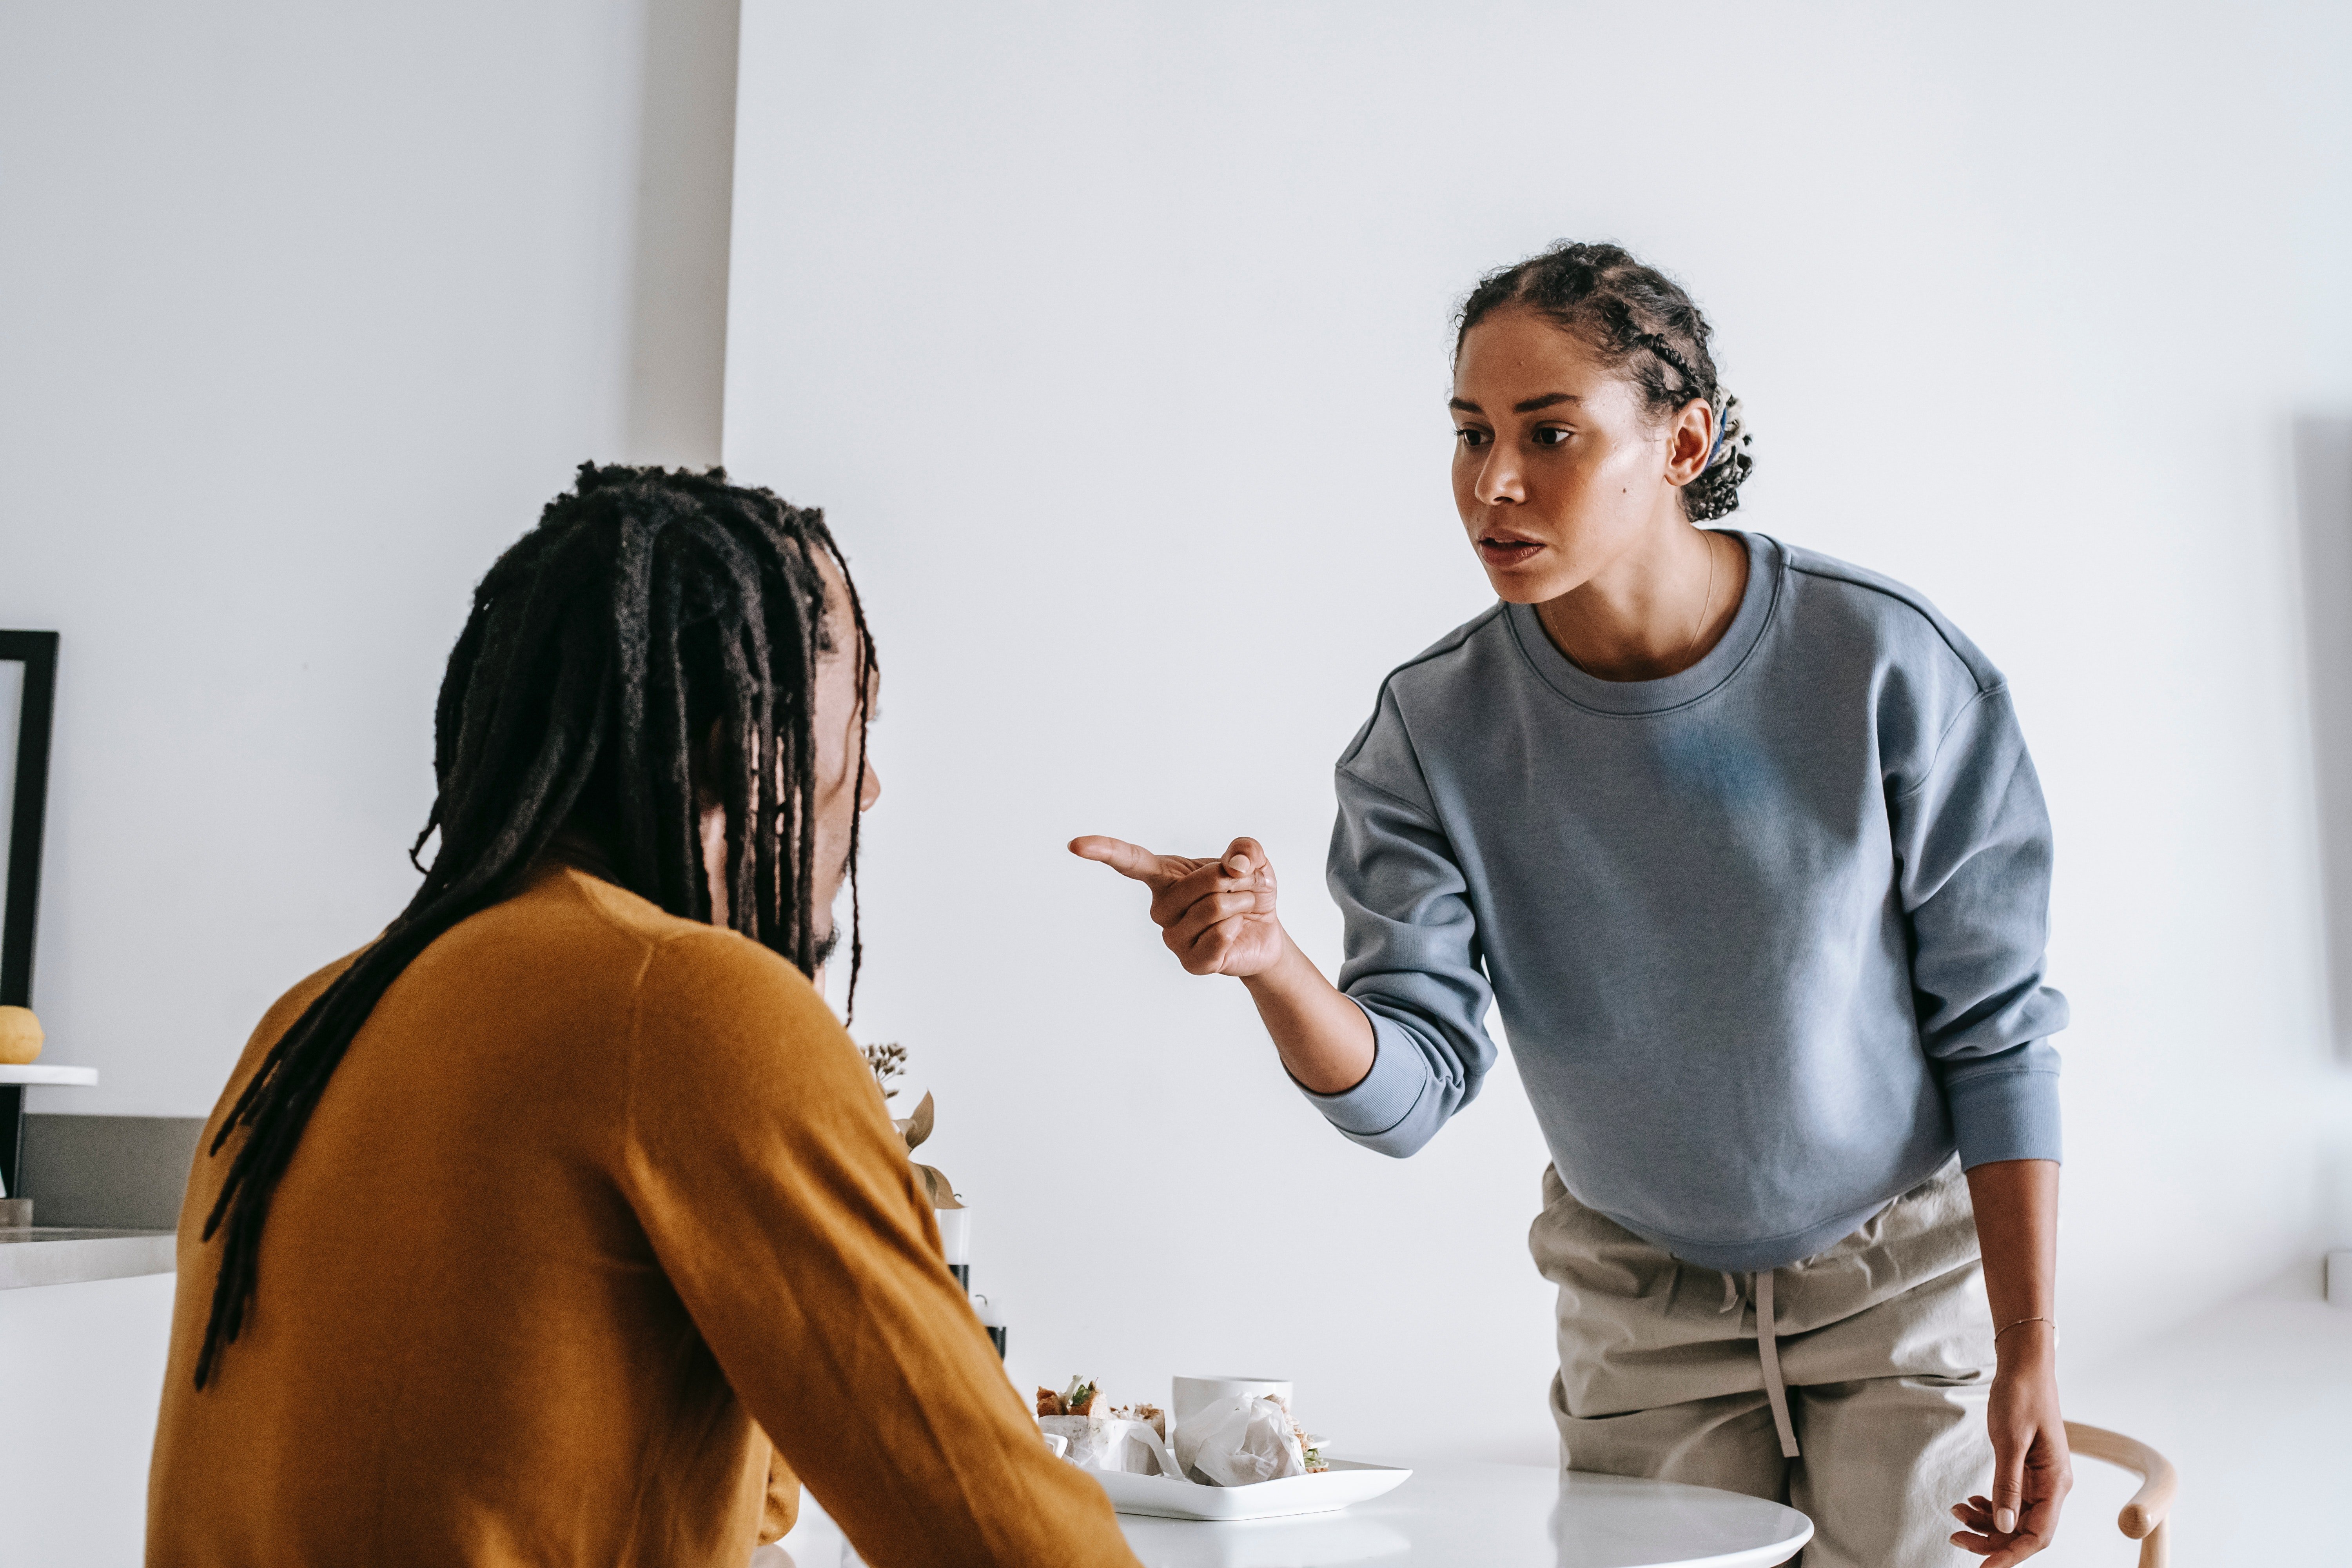 Woman arguing with a man | Photo: Pexels